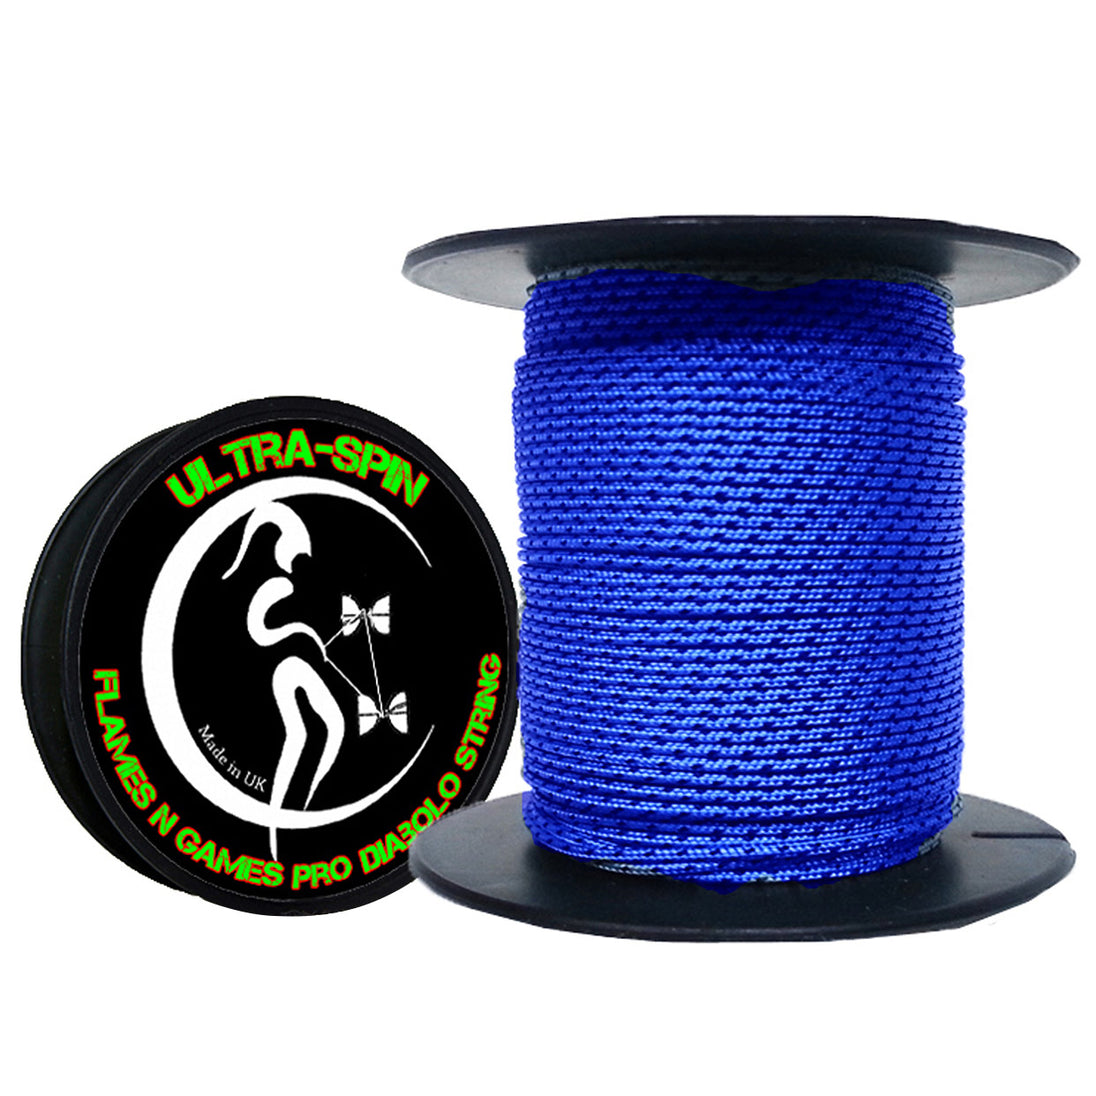 Flames N' Games ULTRA-SPIN Pro Diabolo String 25meter Reel Blue and Black colour